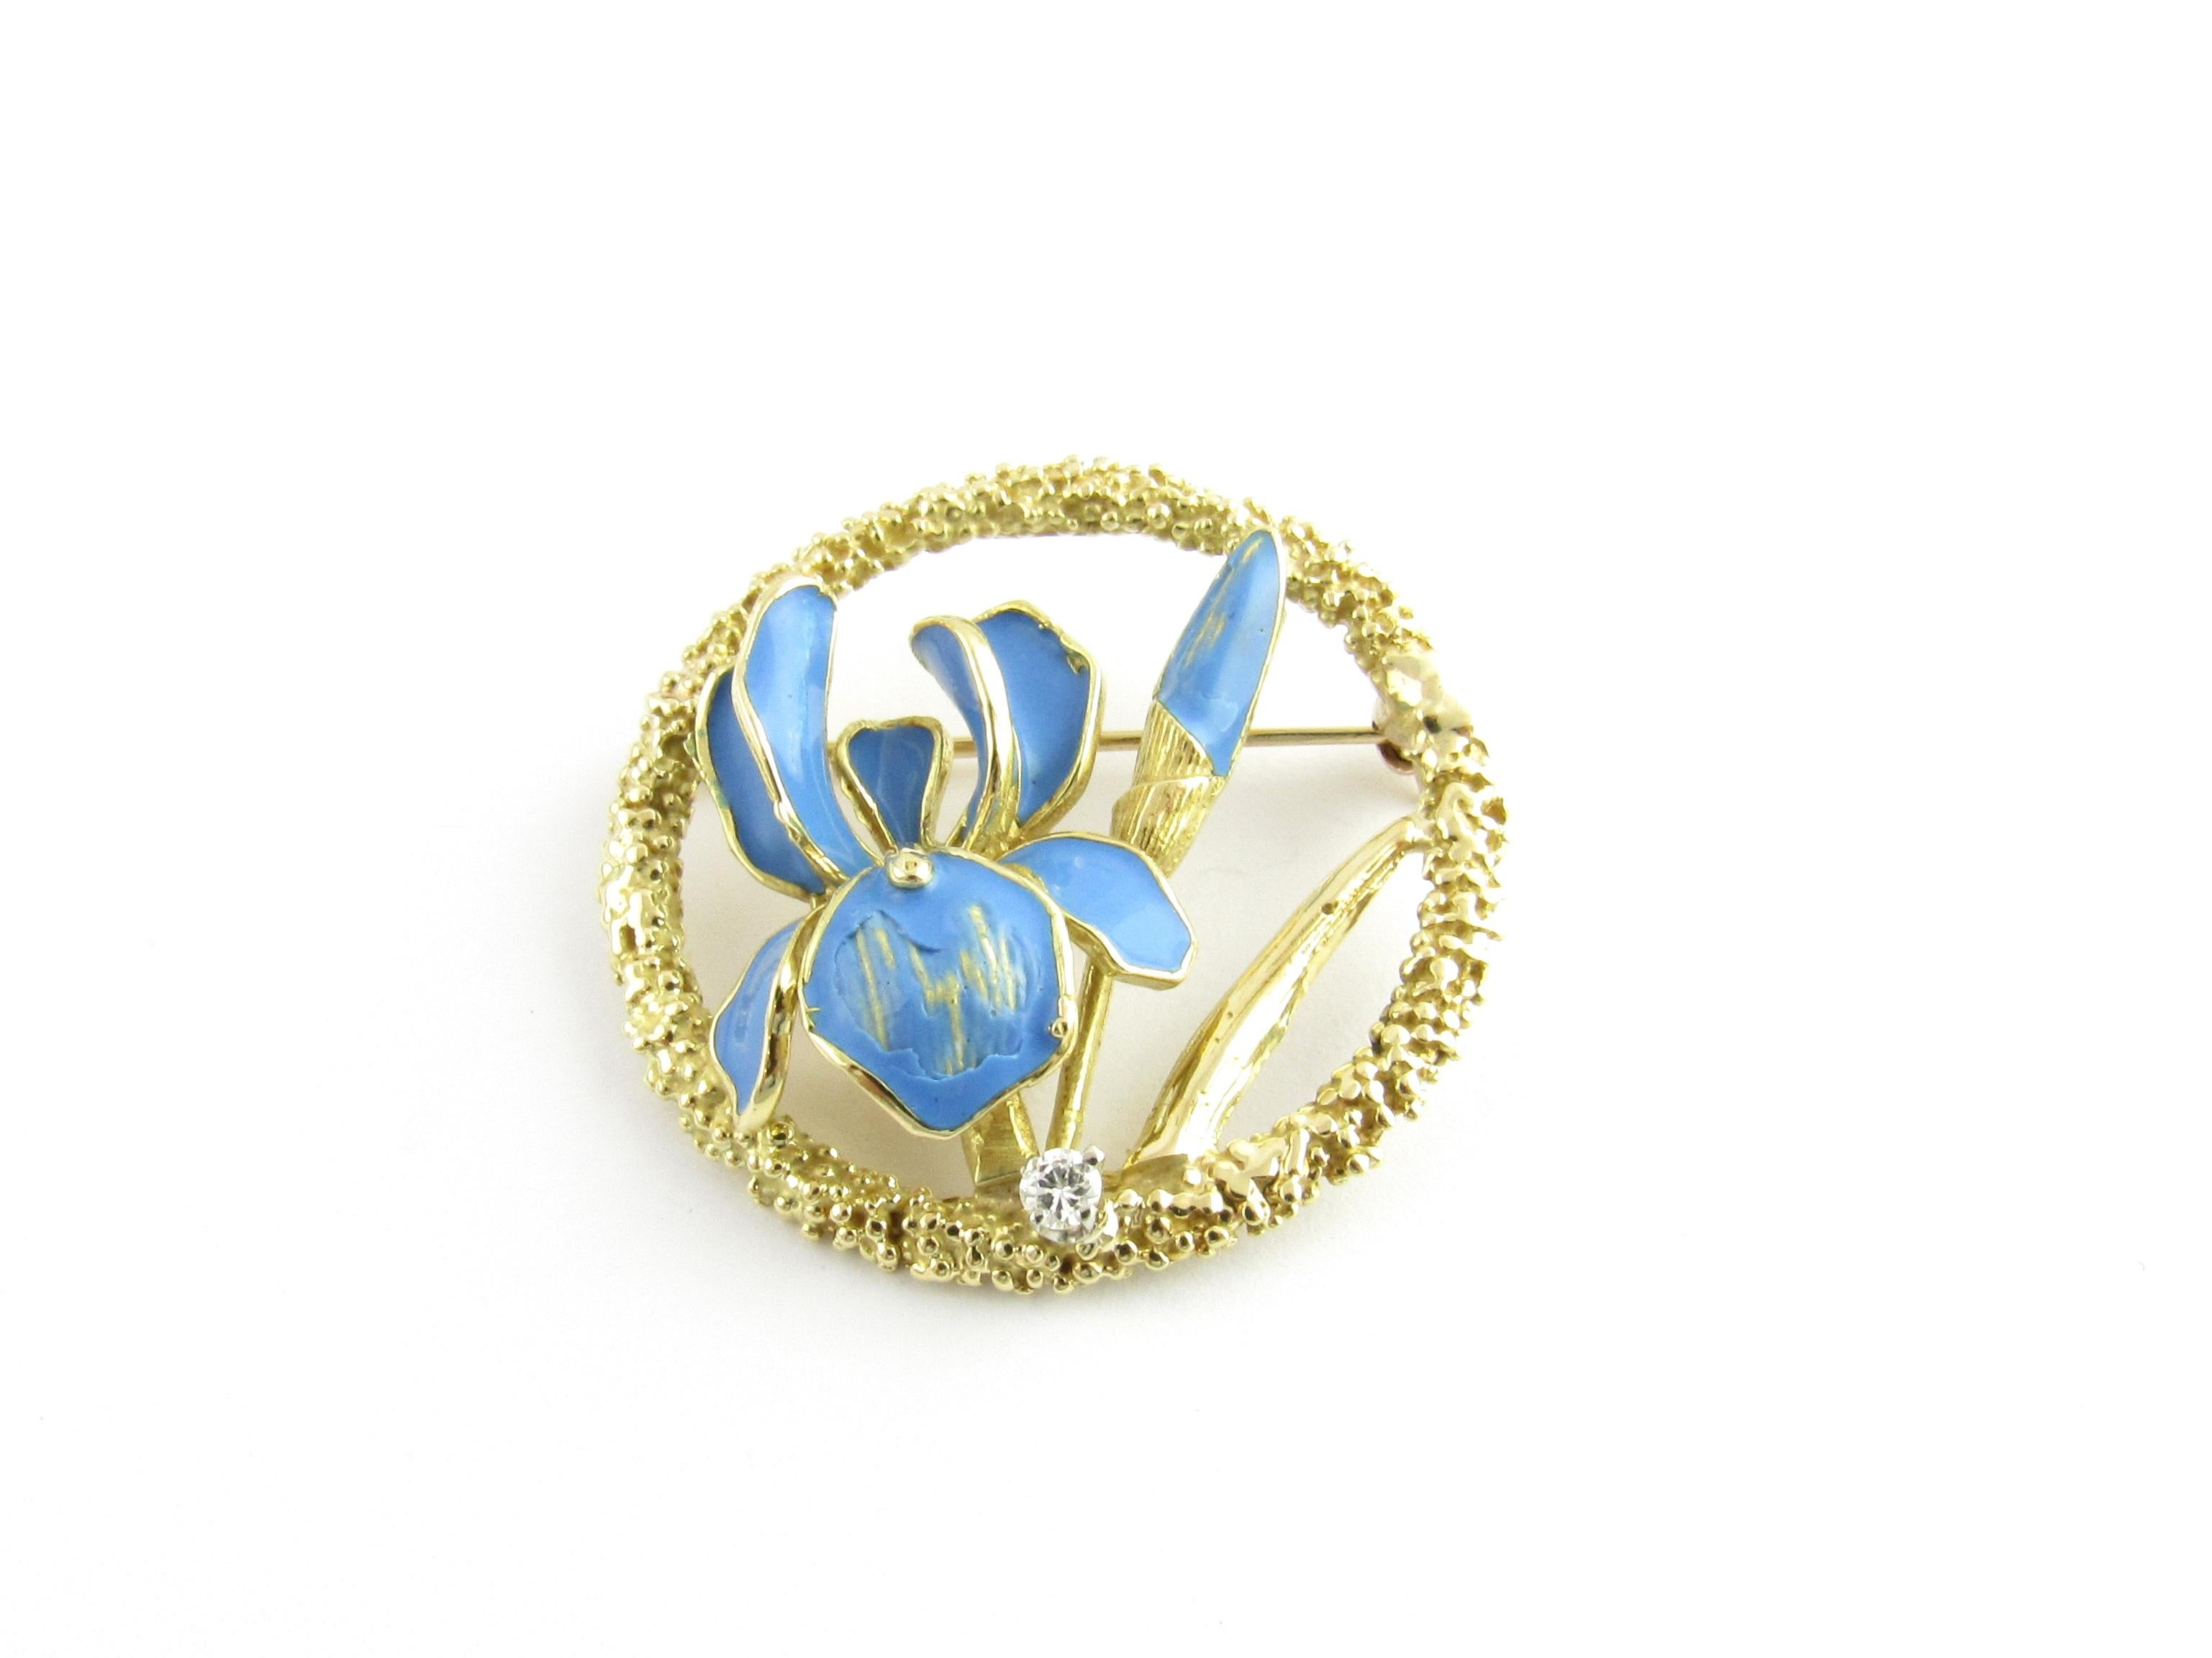 Vintage 18 Karat Yellow Gold Blue Enamel Floral Brooch/Pin

This stunning brooch features a lovely iris accented with blue enamel and one round brilliant cut diamond. Crafted in beautifully detailed 18K yellow gold.

One round brilliant diamond VS1,